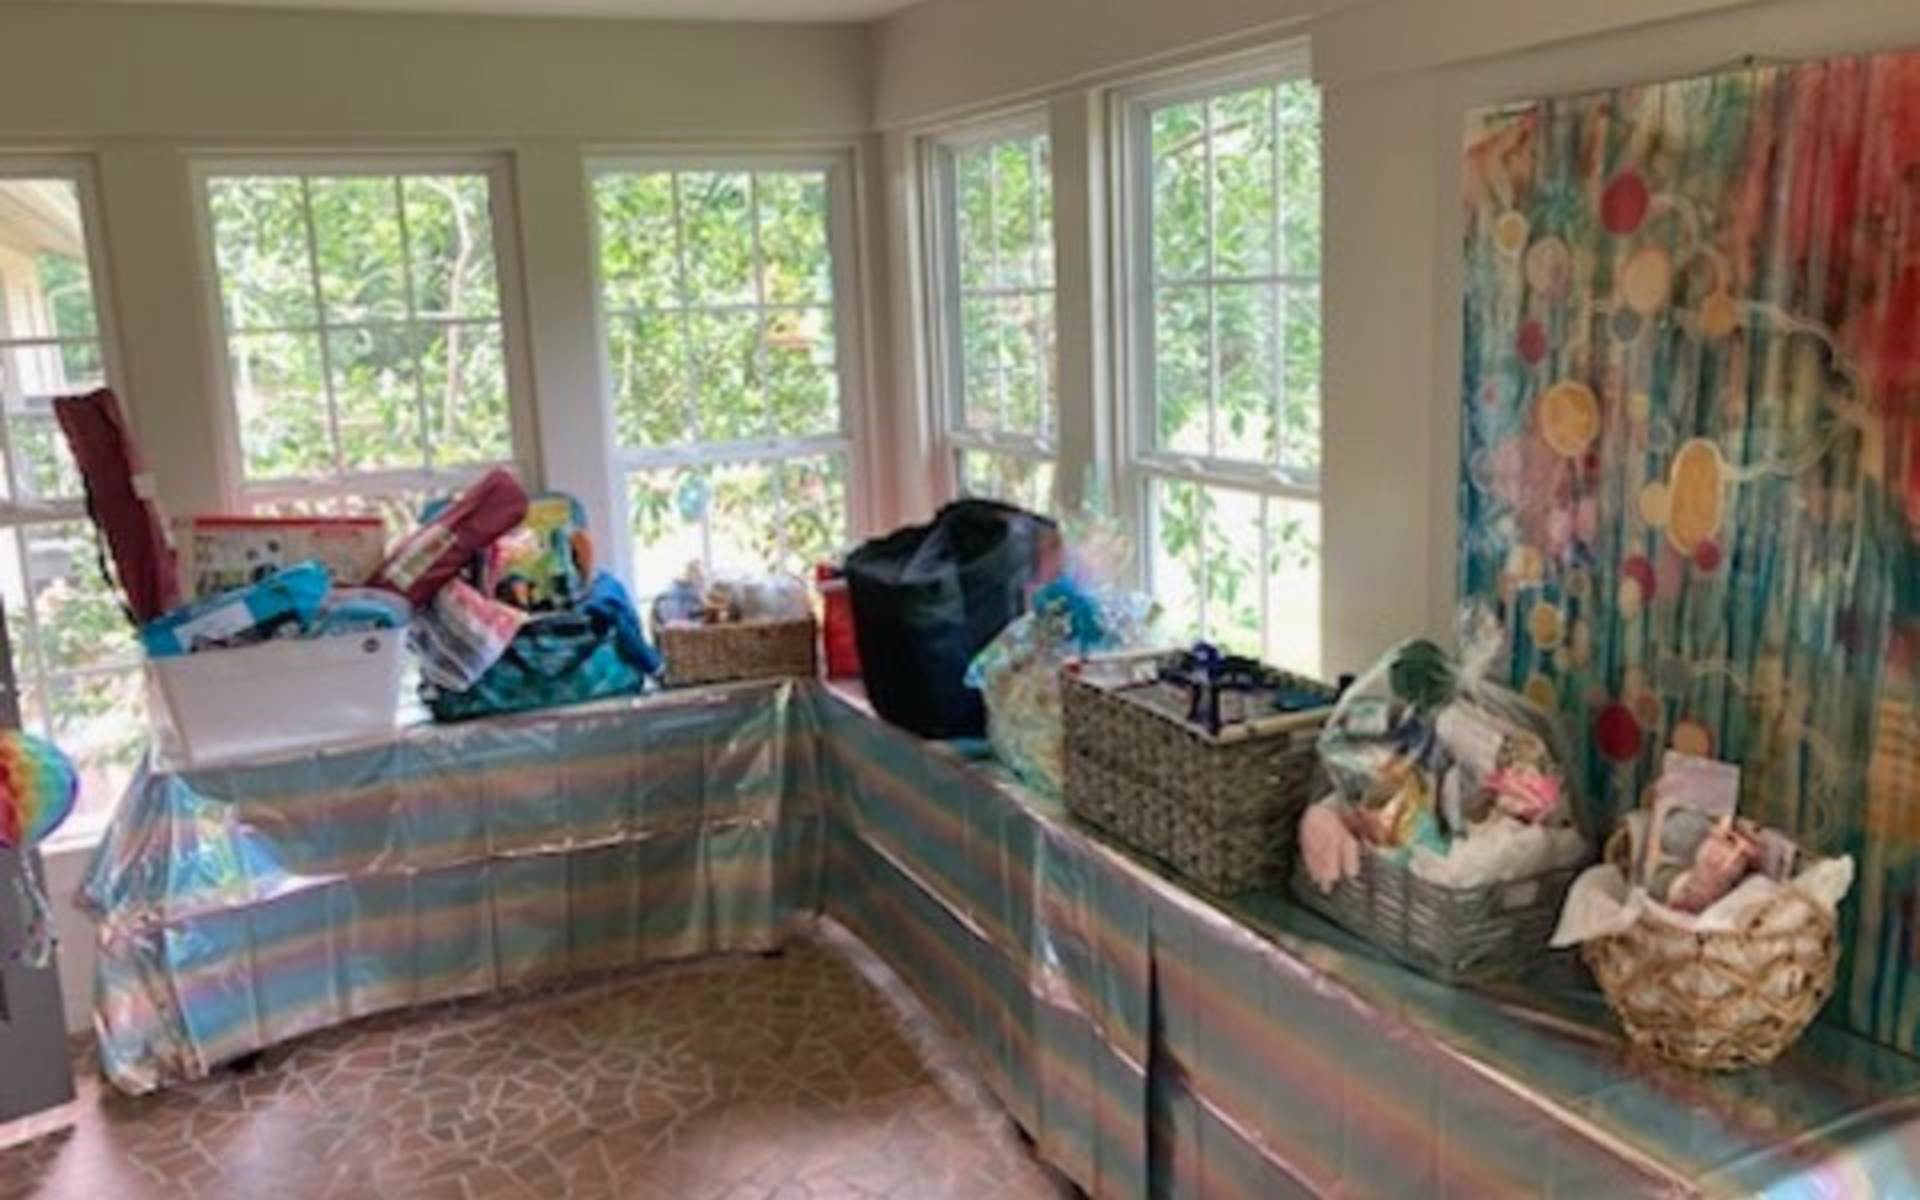 Foster Family Appreciation Room filled with gifts